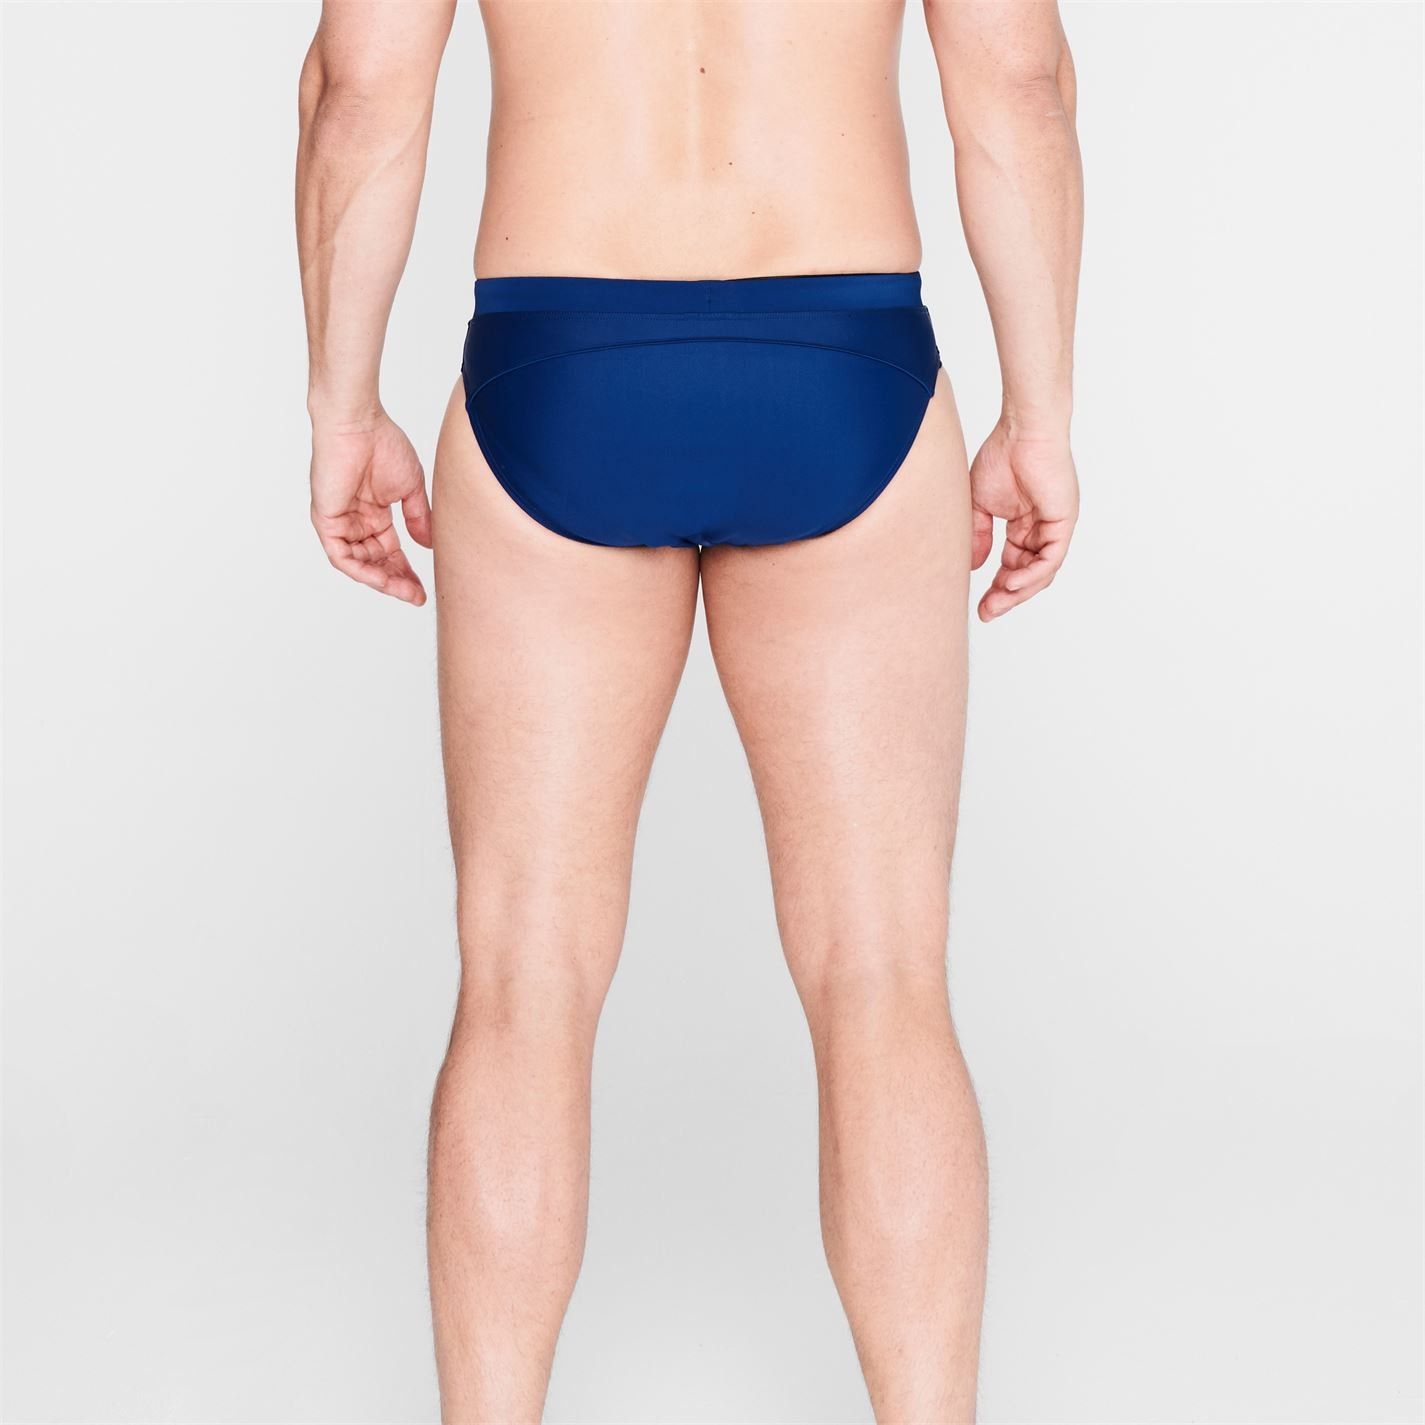 <h2>Slazenger Mens Swimming Trunks</h2>
Look cool this Summer at the beach or beside the pool in these Slazenger Swimming Trunks complete with contrasting side panels and Slazenger branding. Made with chlorine-resistant LYCRA® fiber to last up to 10 times longer than those with ordinary elastane. 

> Please note: The style you receive may vary from the image shown

> Mens Swimming Trunks
> Drawstring Waist
> Contrasting Side Panels
> Slazenger Branding
> 82% Nylon / 18% chlorine resistant LYCRA®
> Machine Washable
> Keep Away From Fire